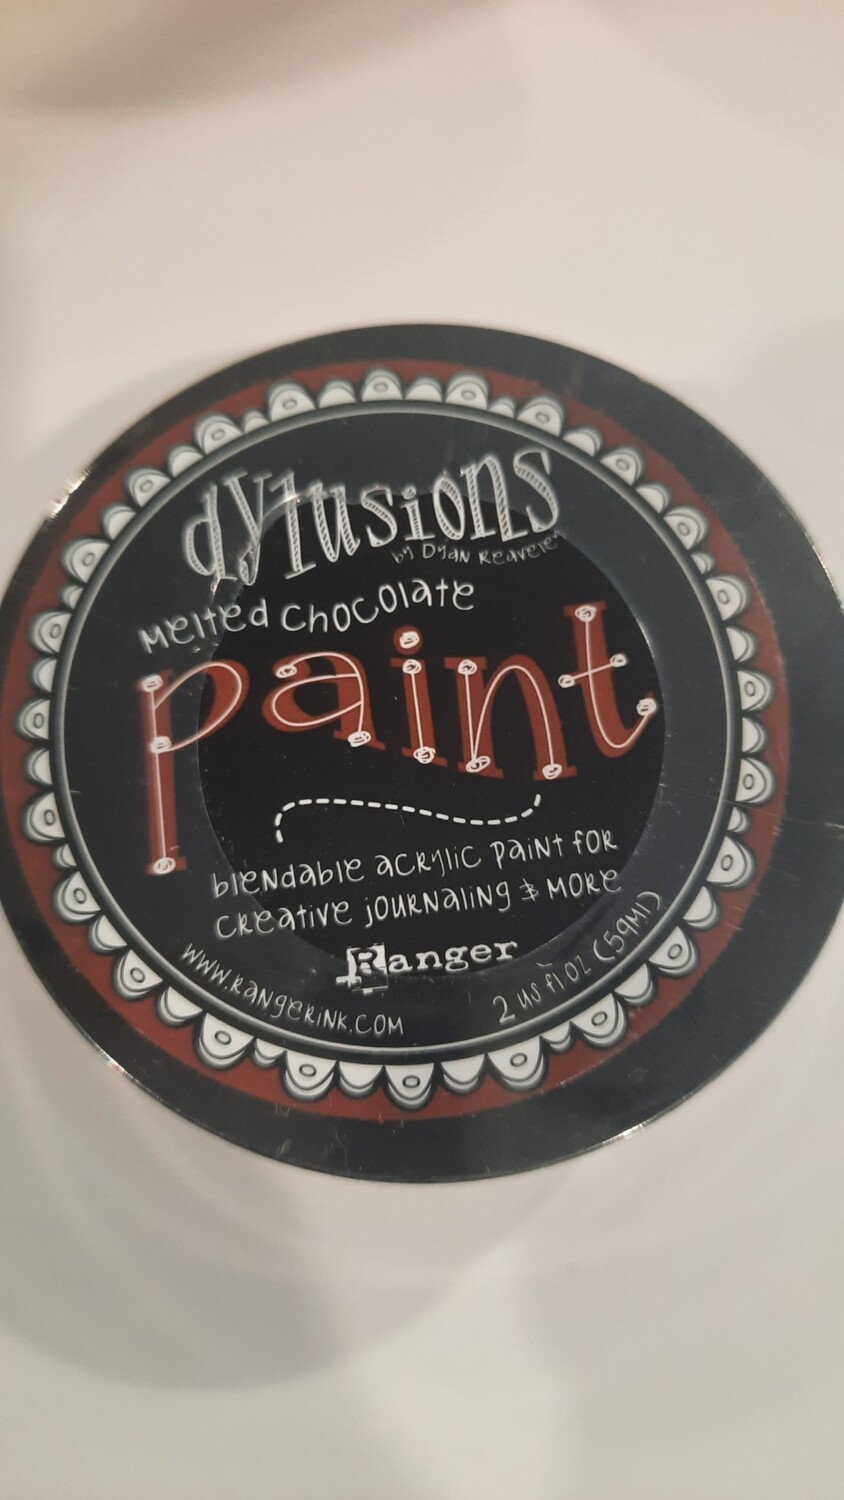 Dylusions Melted Chocolate Paint pot 2oz